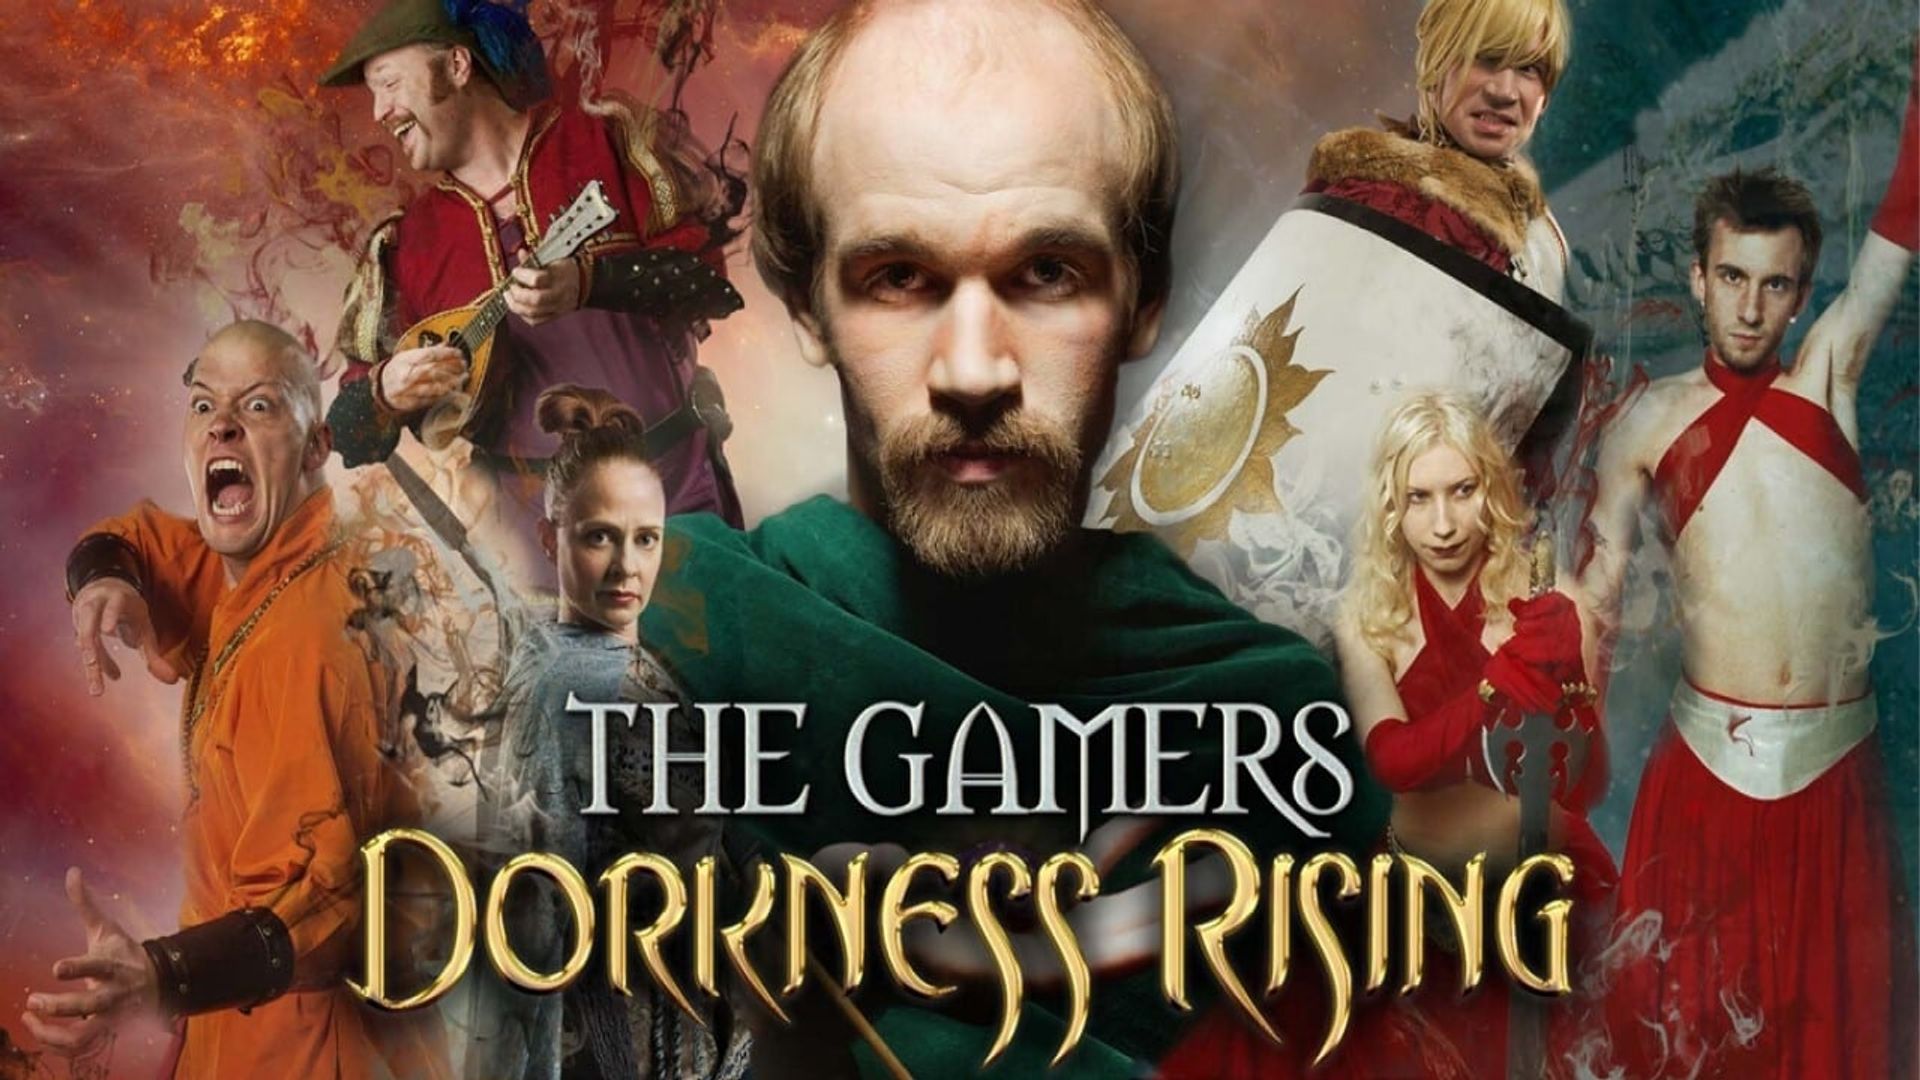 The Gamers: Dorkness Rising background